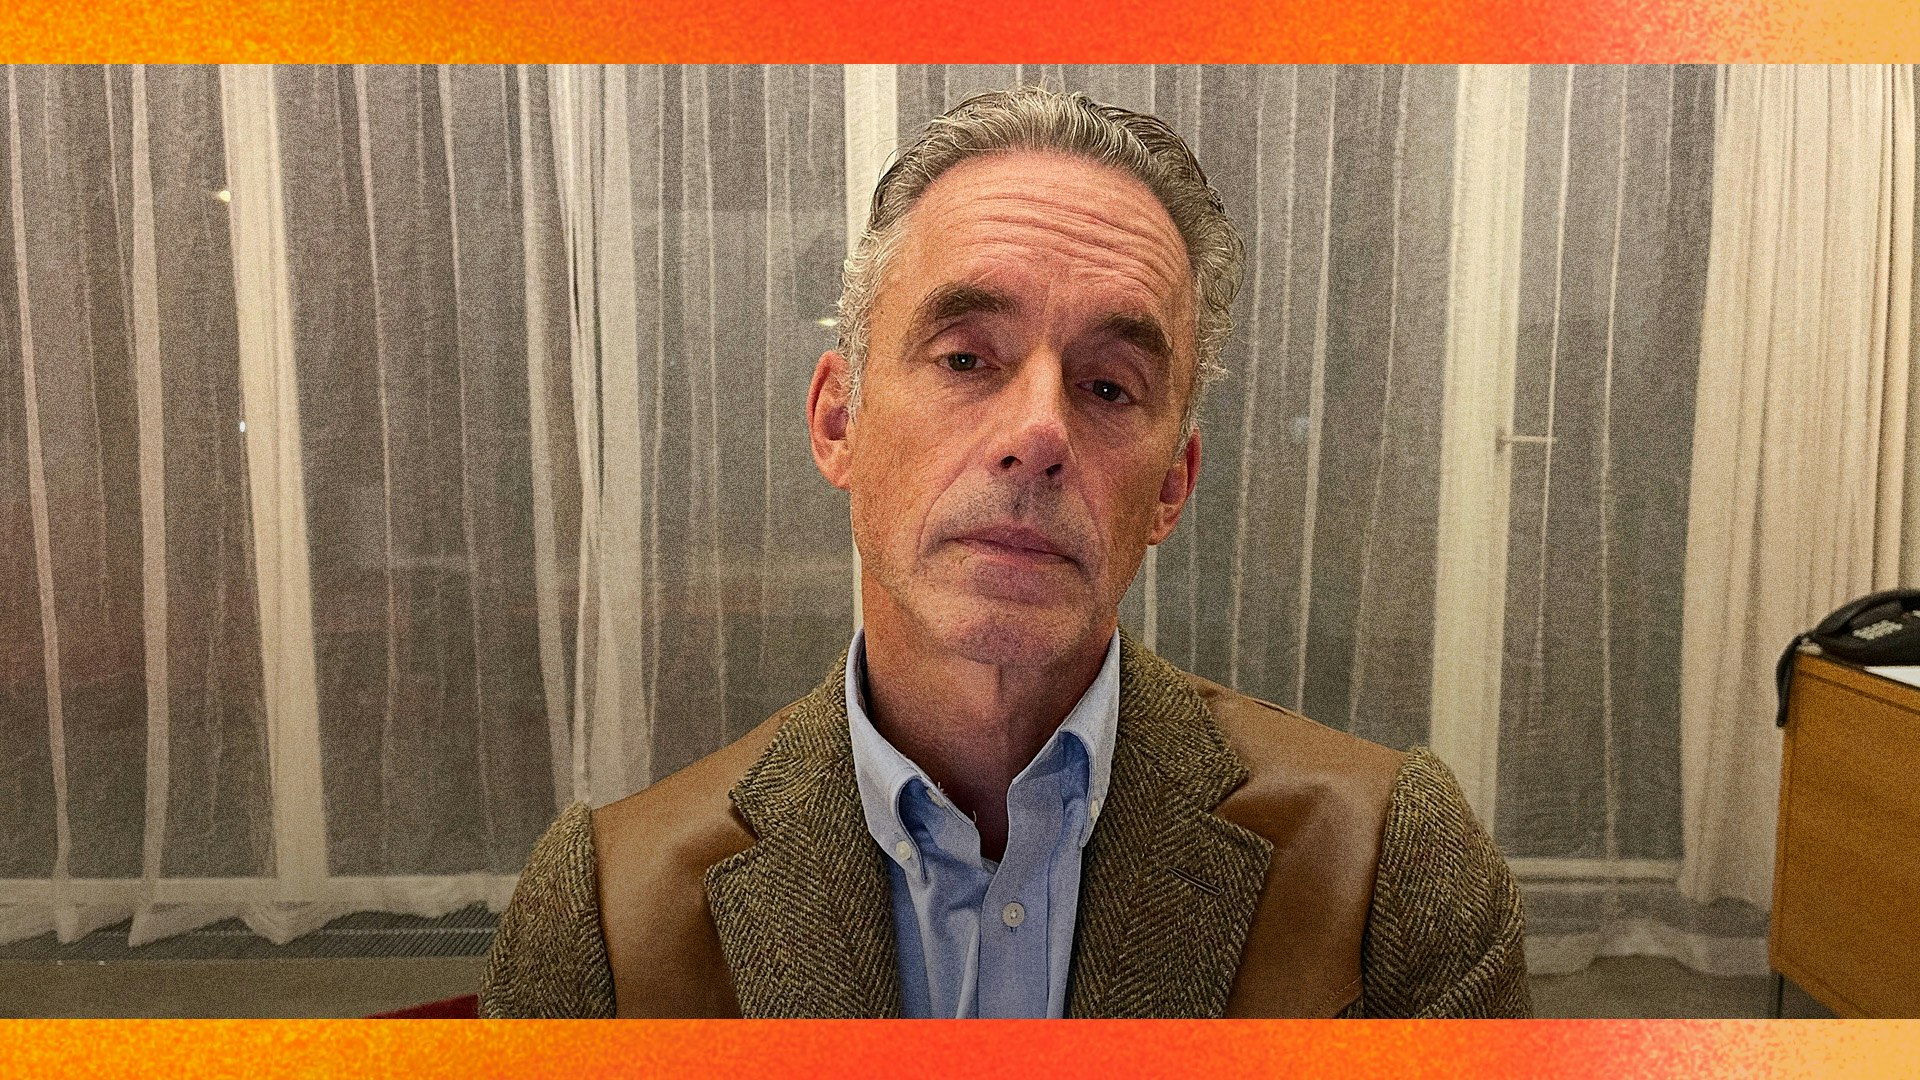 Ep. 441 - Jordan Peterson's First All Access Live